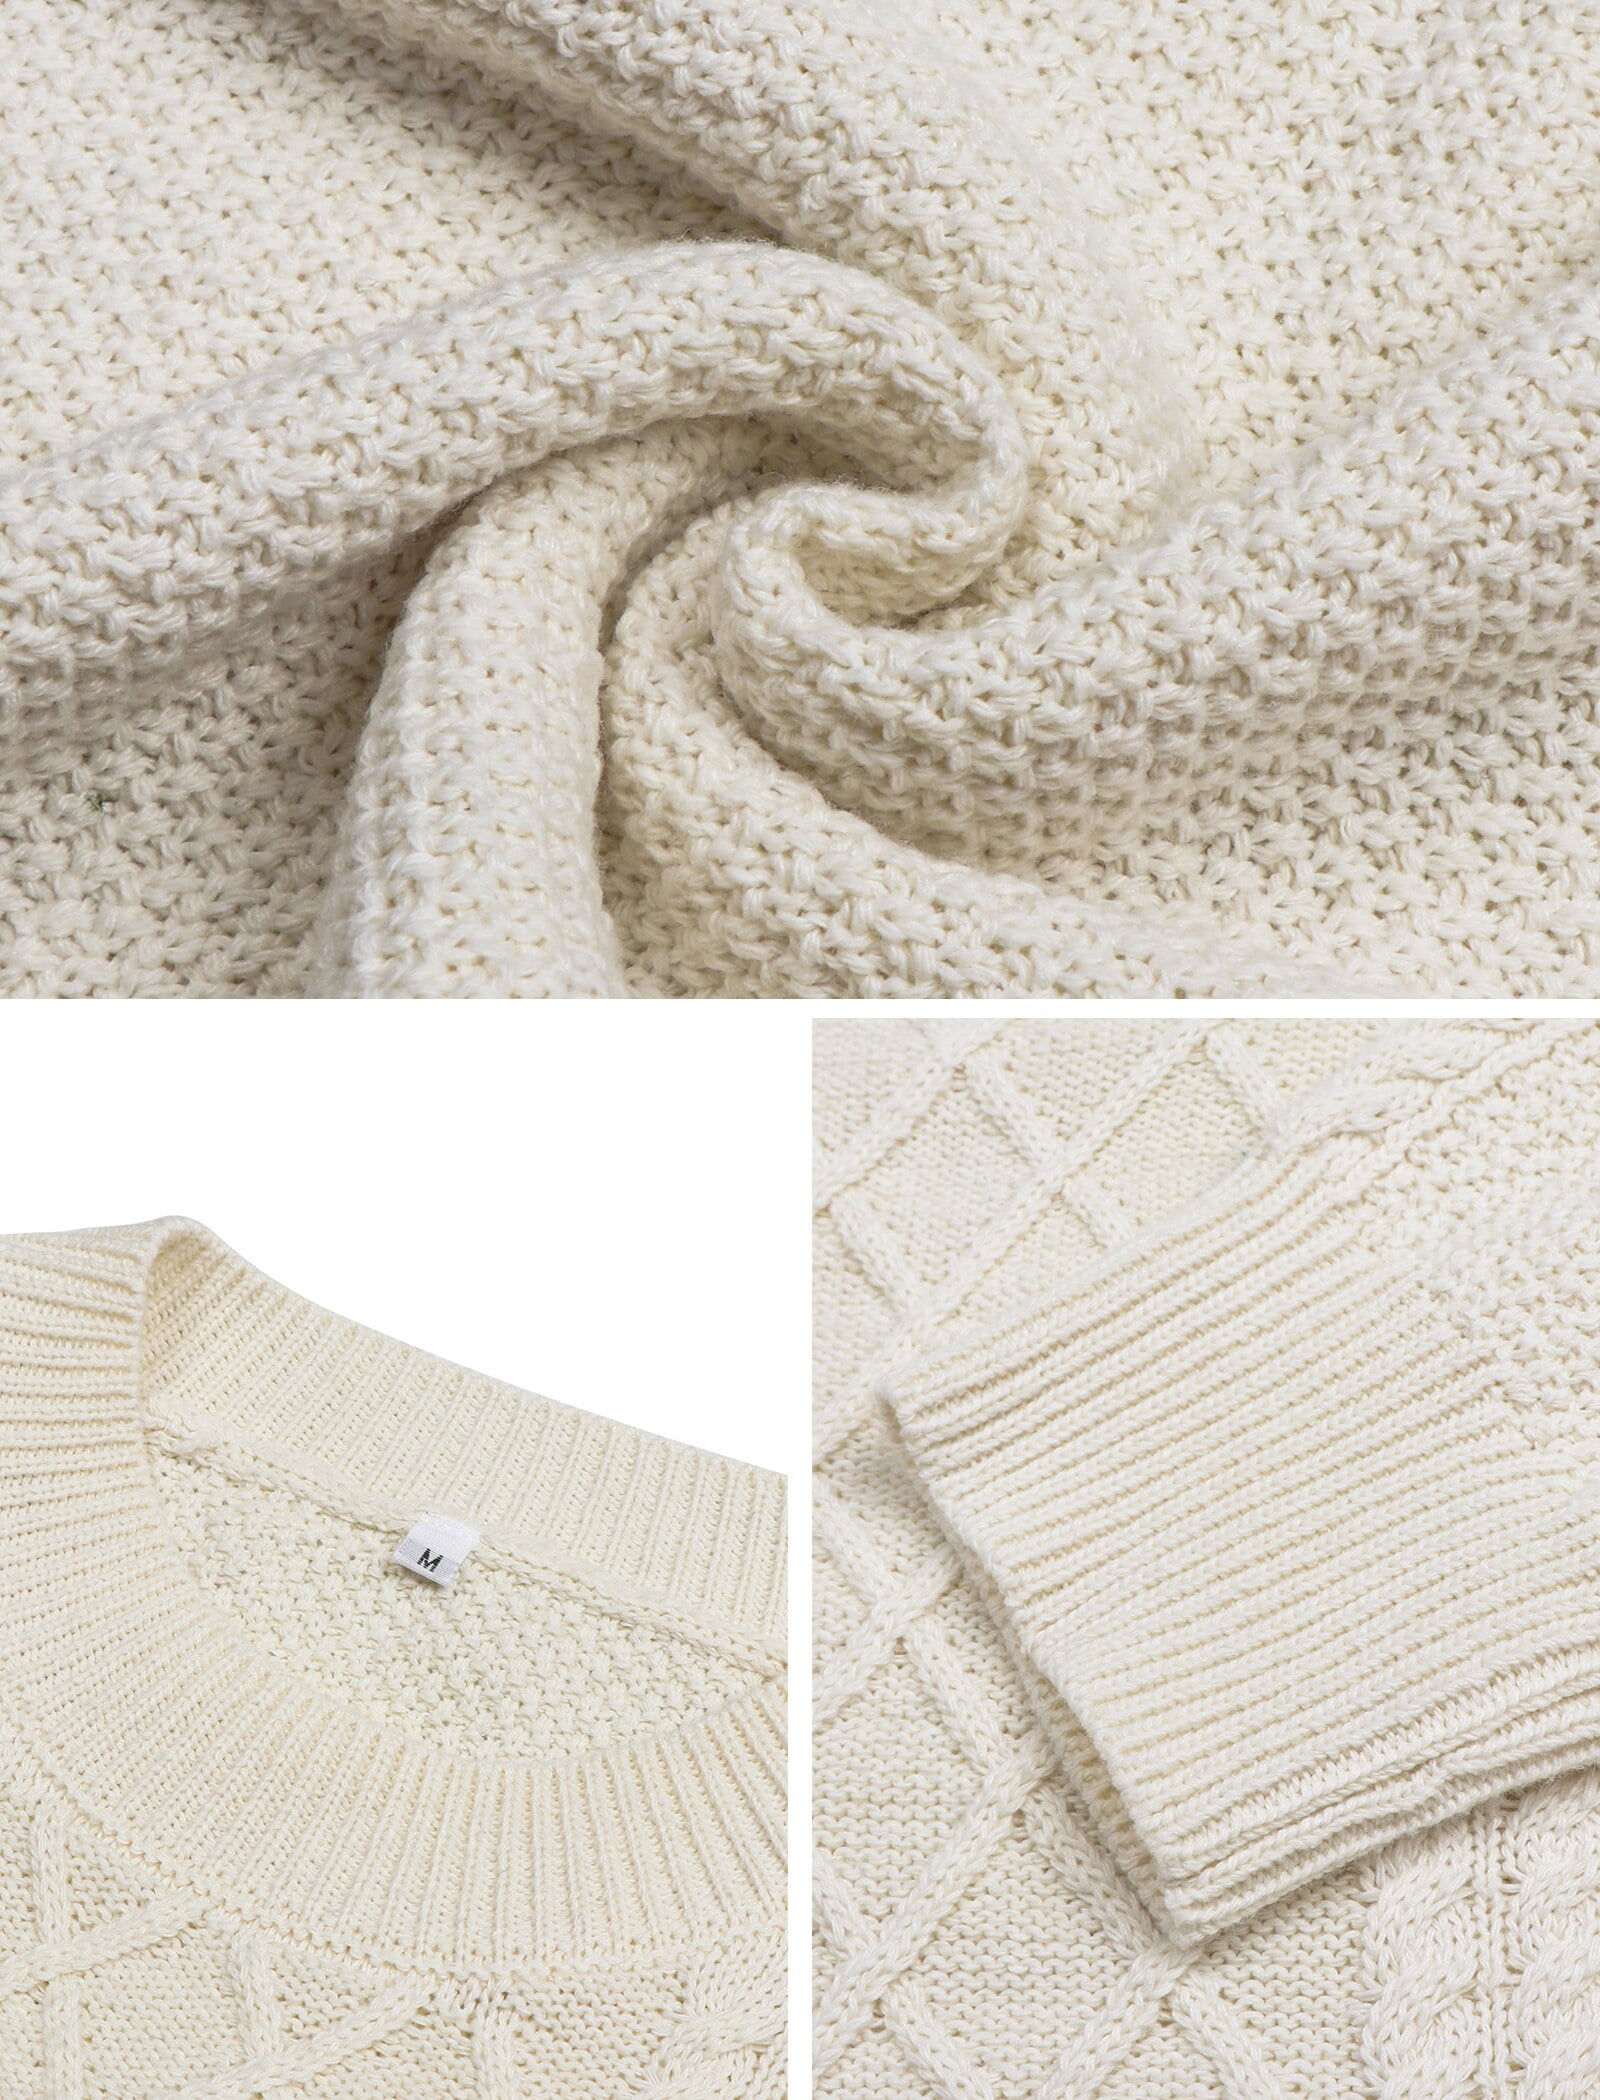 MOSHU Oversized Sweaters for Women Cable Knit Chunky Pullover Sweater